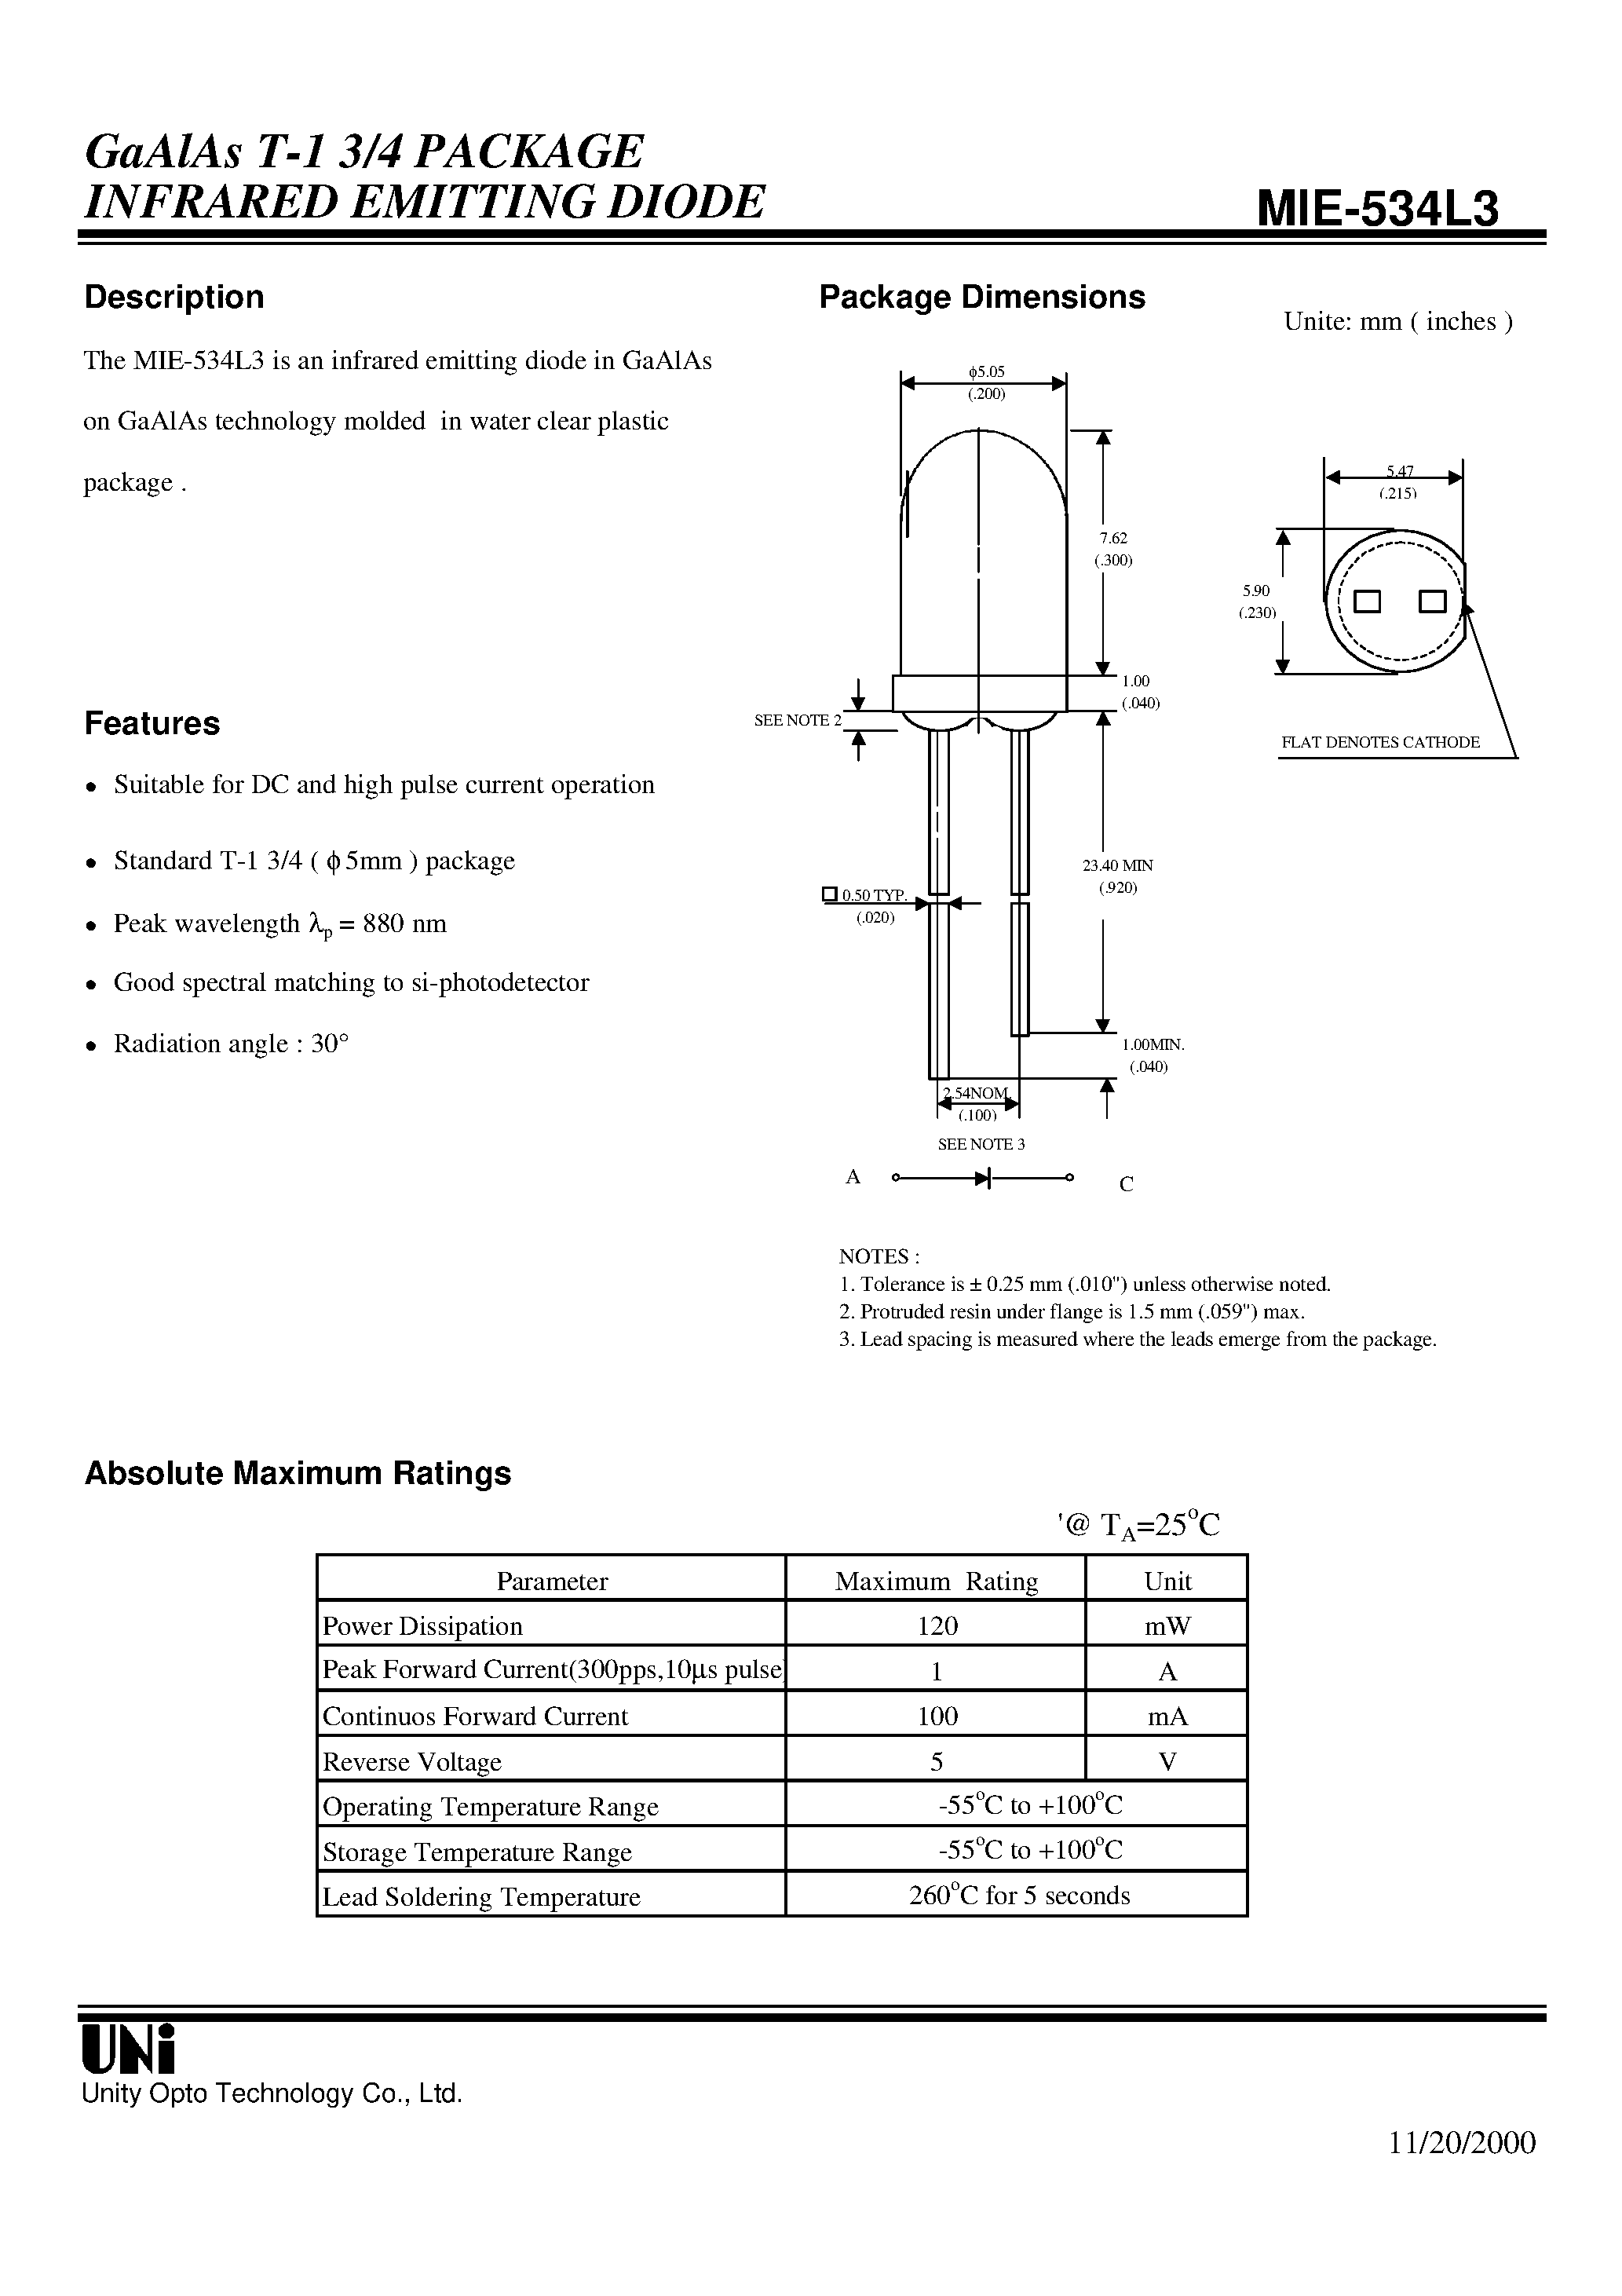 Datasheet MIE-534L3 - GaAlAs T-1 3/4 PACKAGE INFRARED EMITTING DIODE page 1